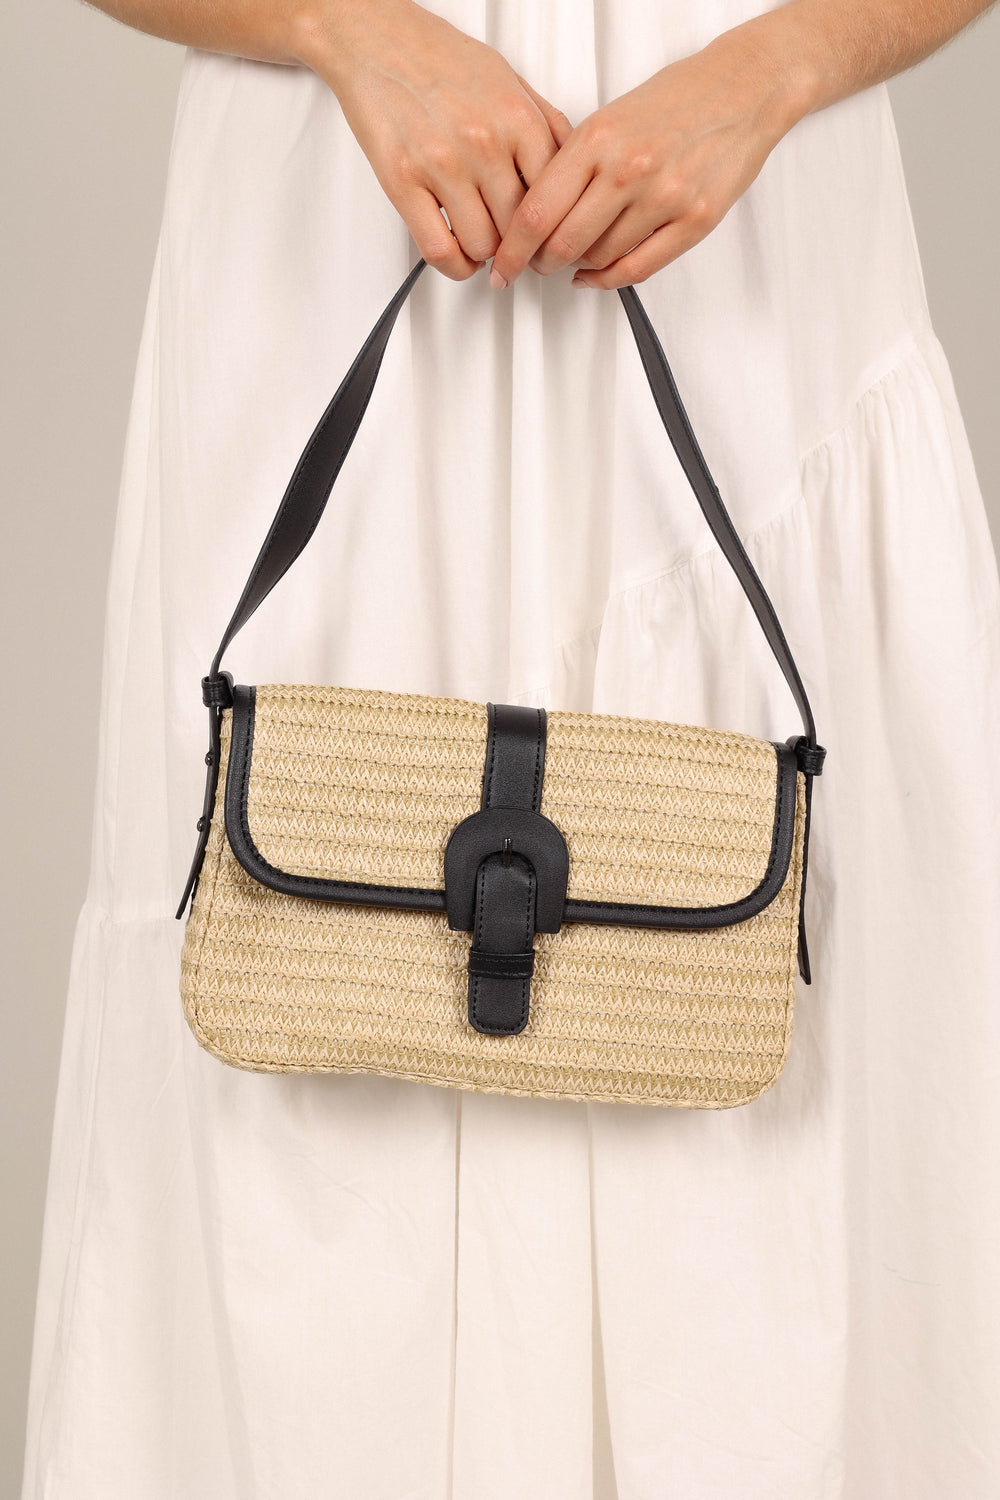 Petal and Pup USA ACCESSORIES Dovie Straw Shoulder Bag - Natural/Black One Size